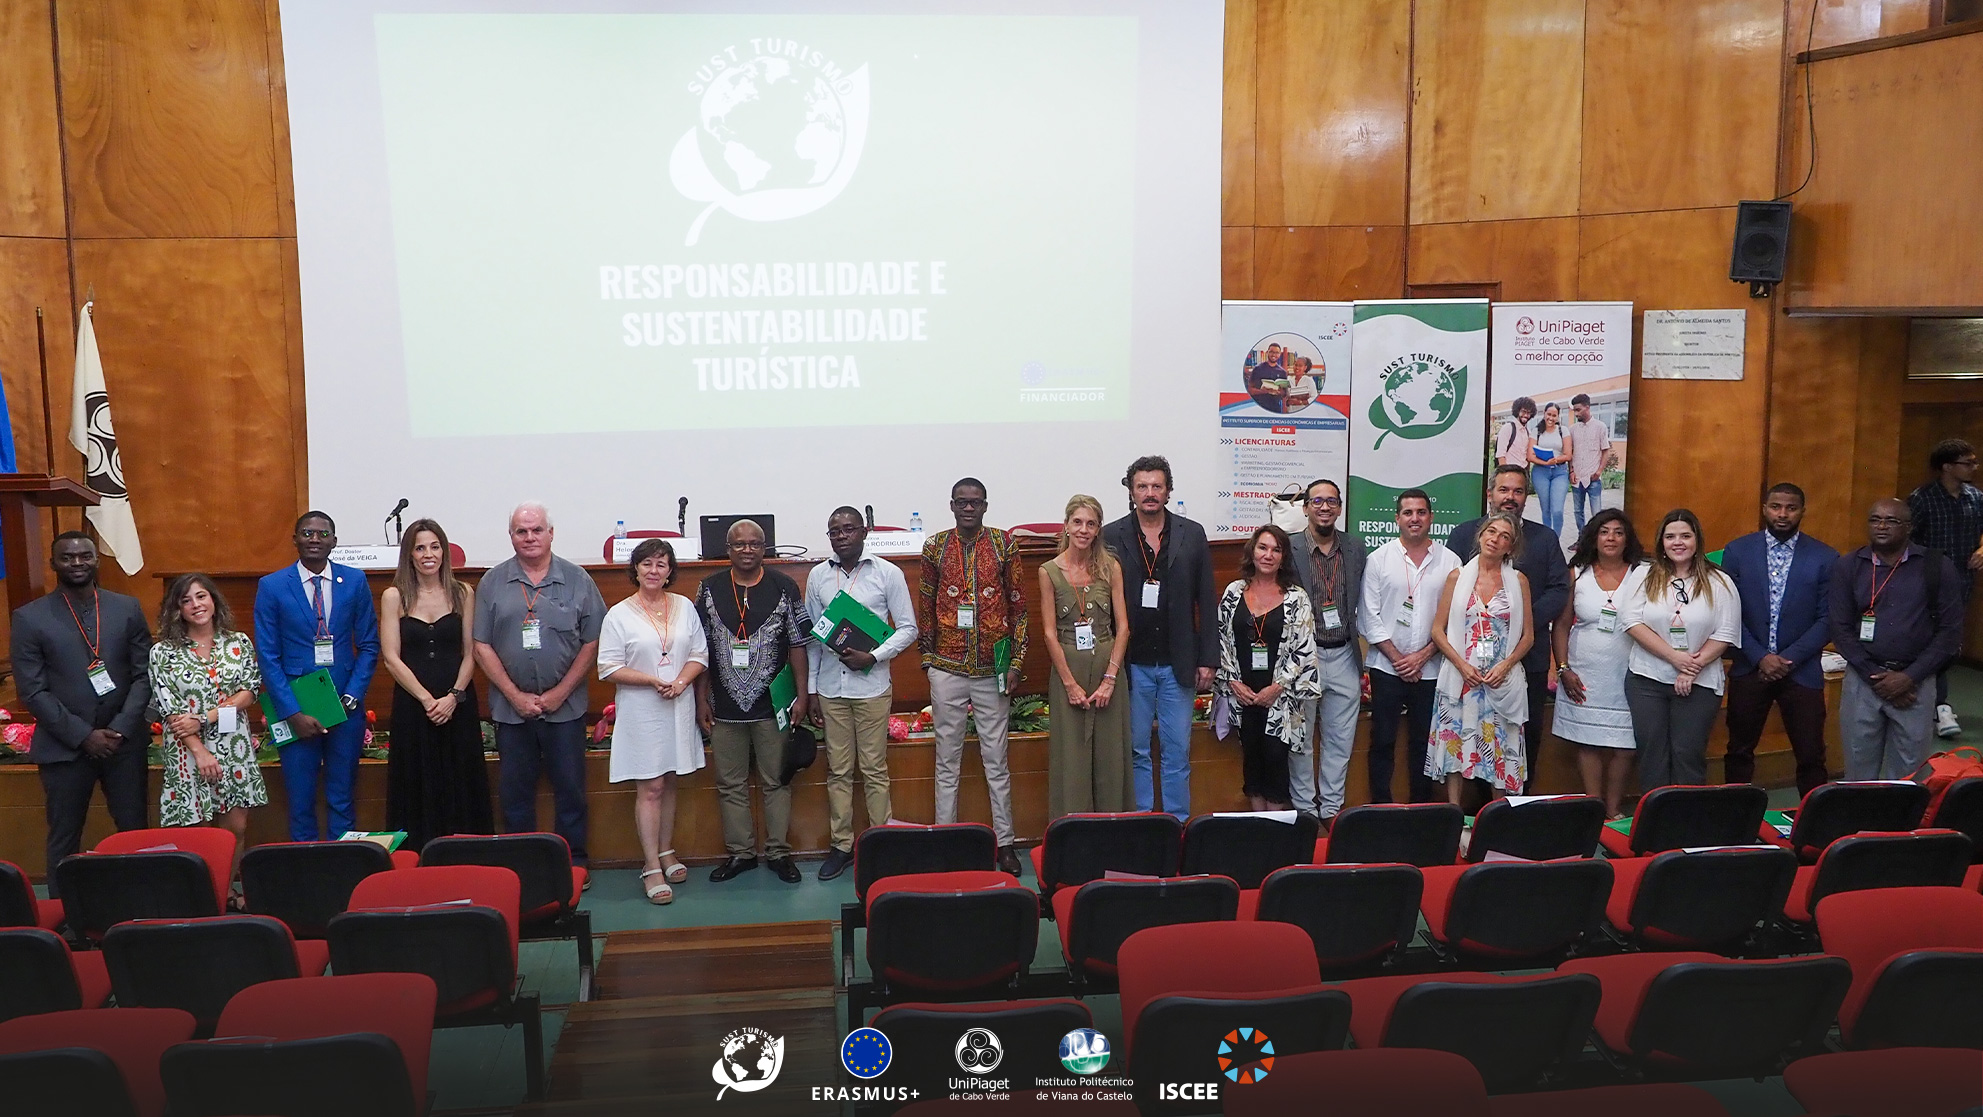 UNIVERSITIES FROM ANGOLA, SPAIN, PORTUGAL AND CAPE VERDE UNITED FOR SUSTAINABLE TOURISM